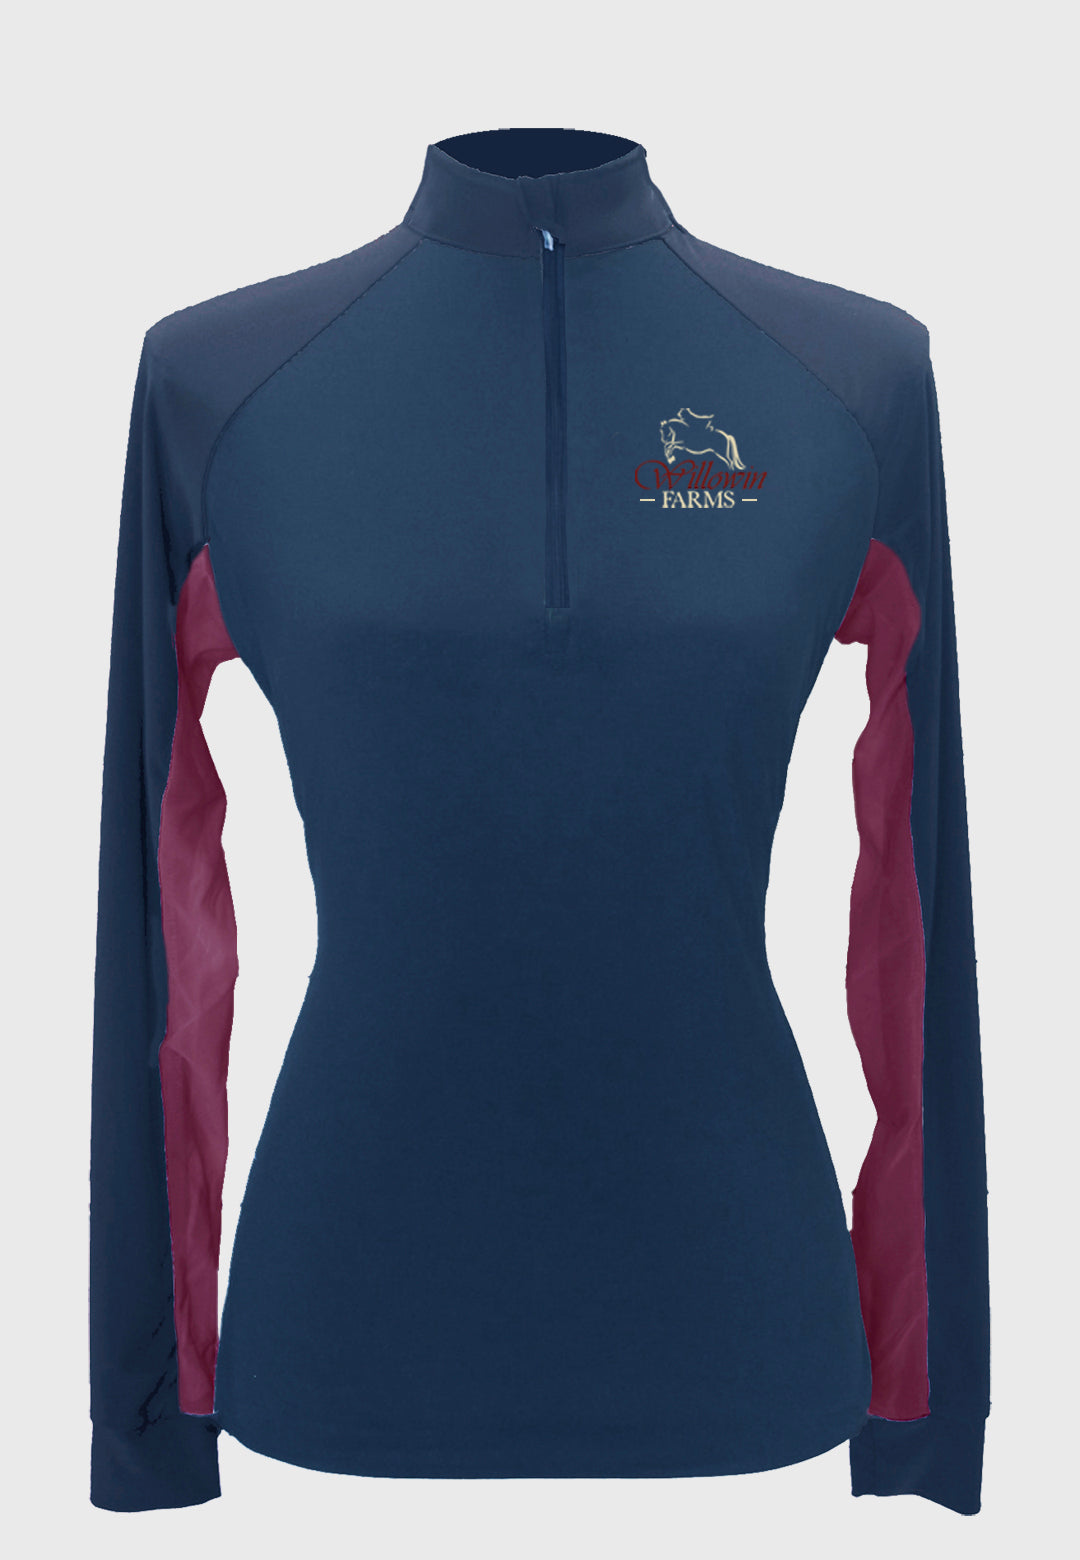 Willowin Farms Custom Sun Shirt - Navy with Maroon Vents    Adult + Youth Sizes